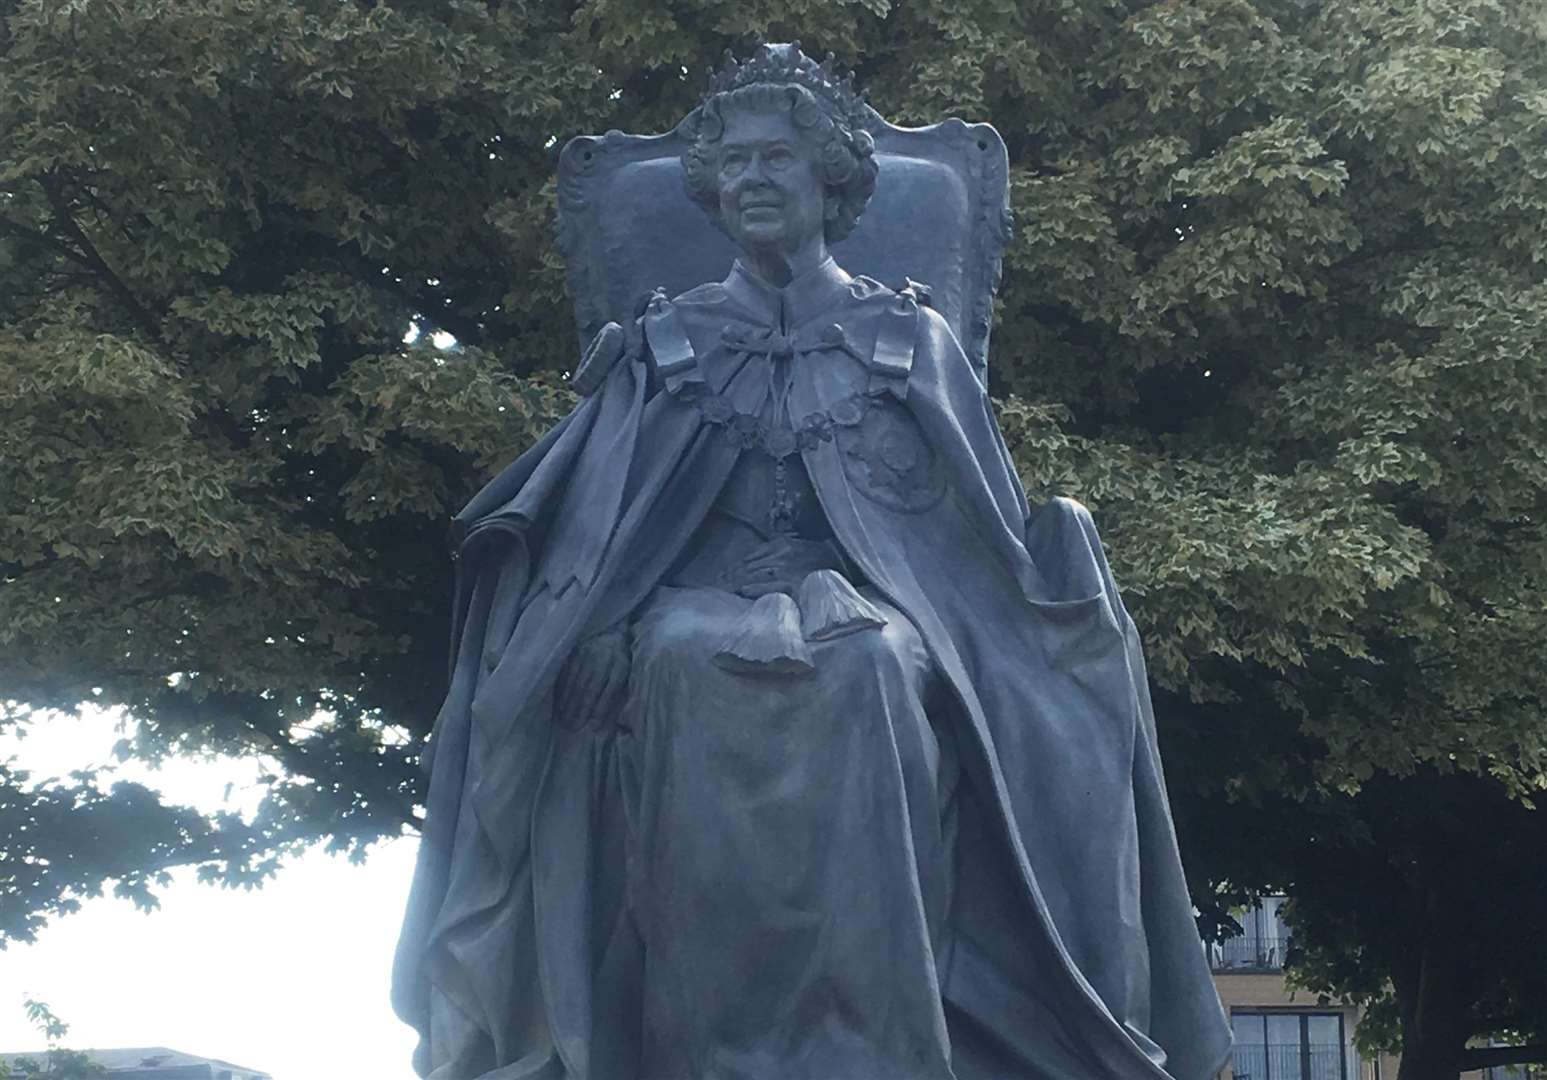 The Queen statue unveiled in Gravesend